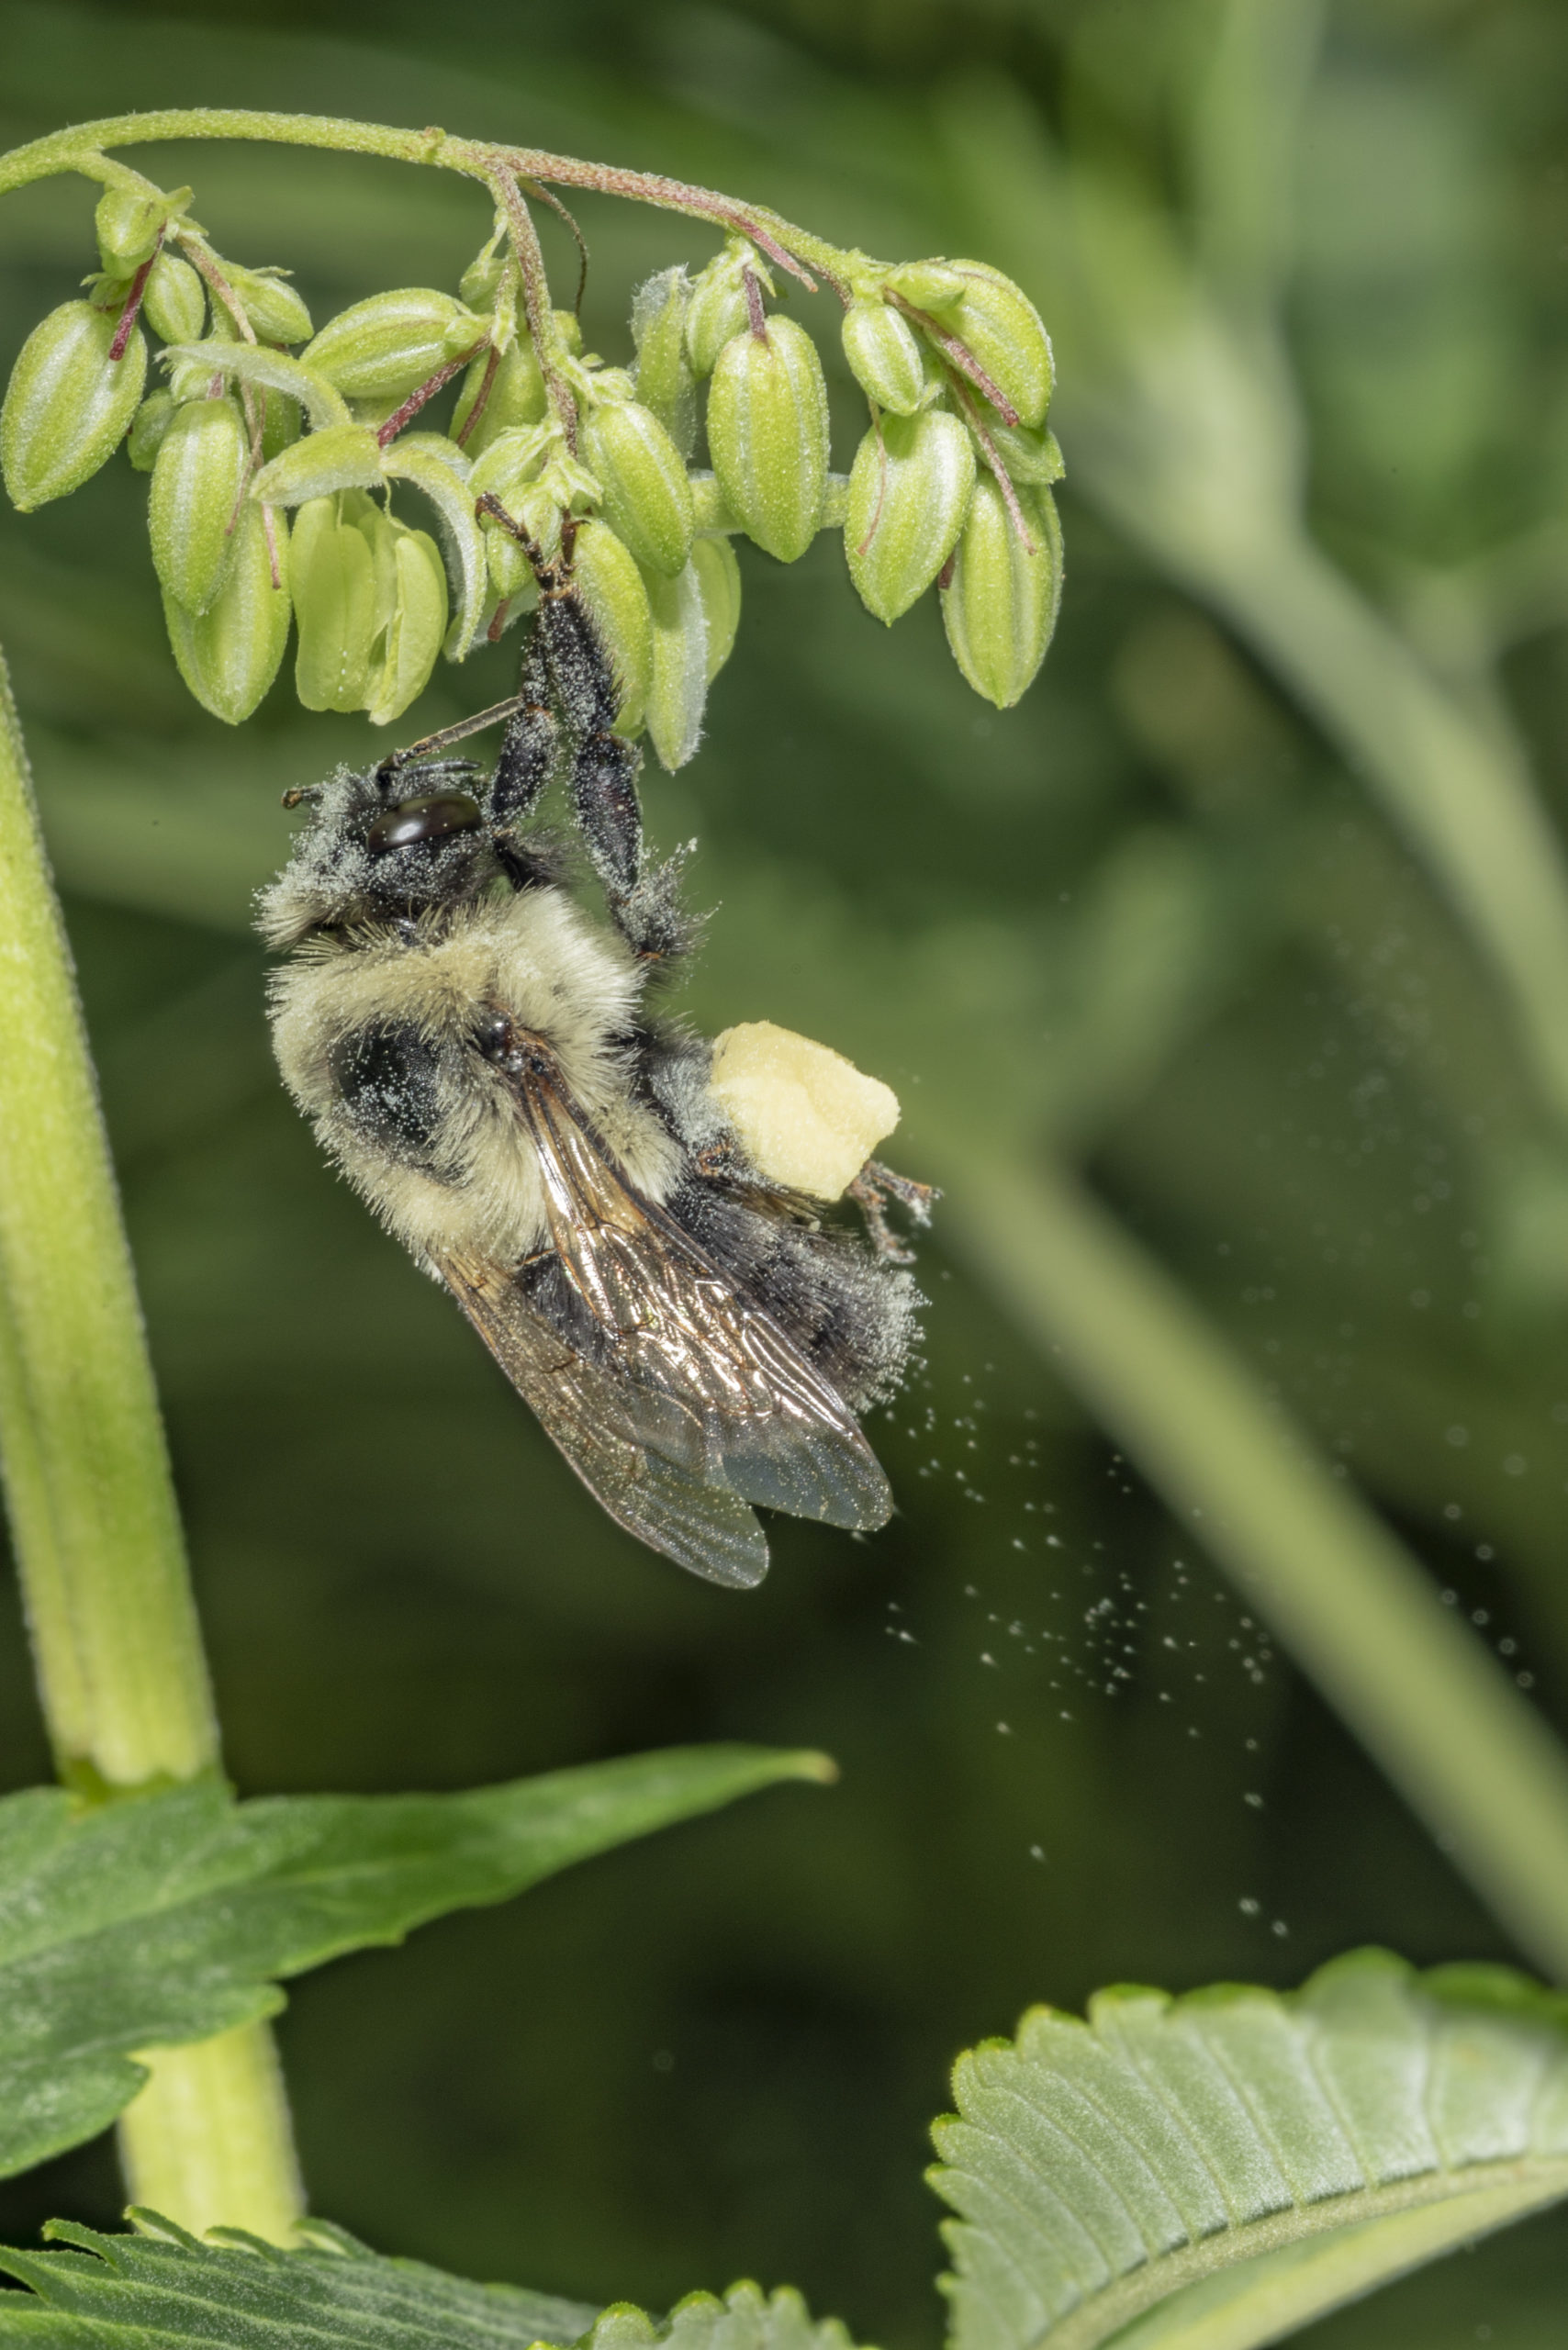 Image of a bumble bee collecting pollen from a hemp plant